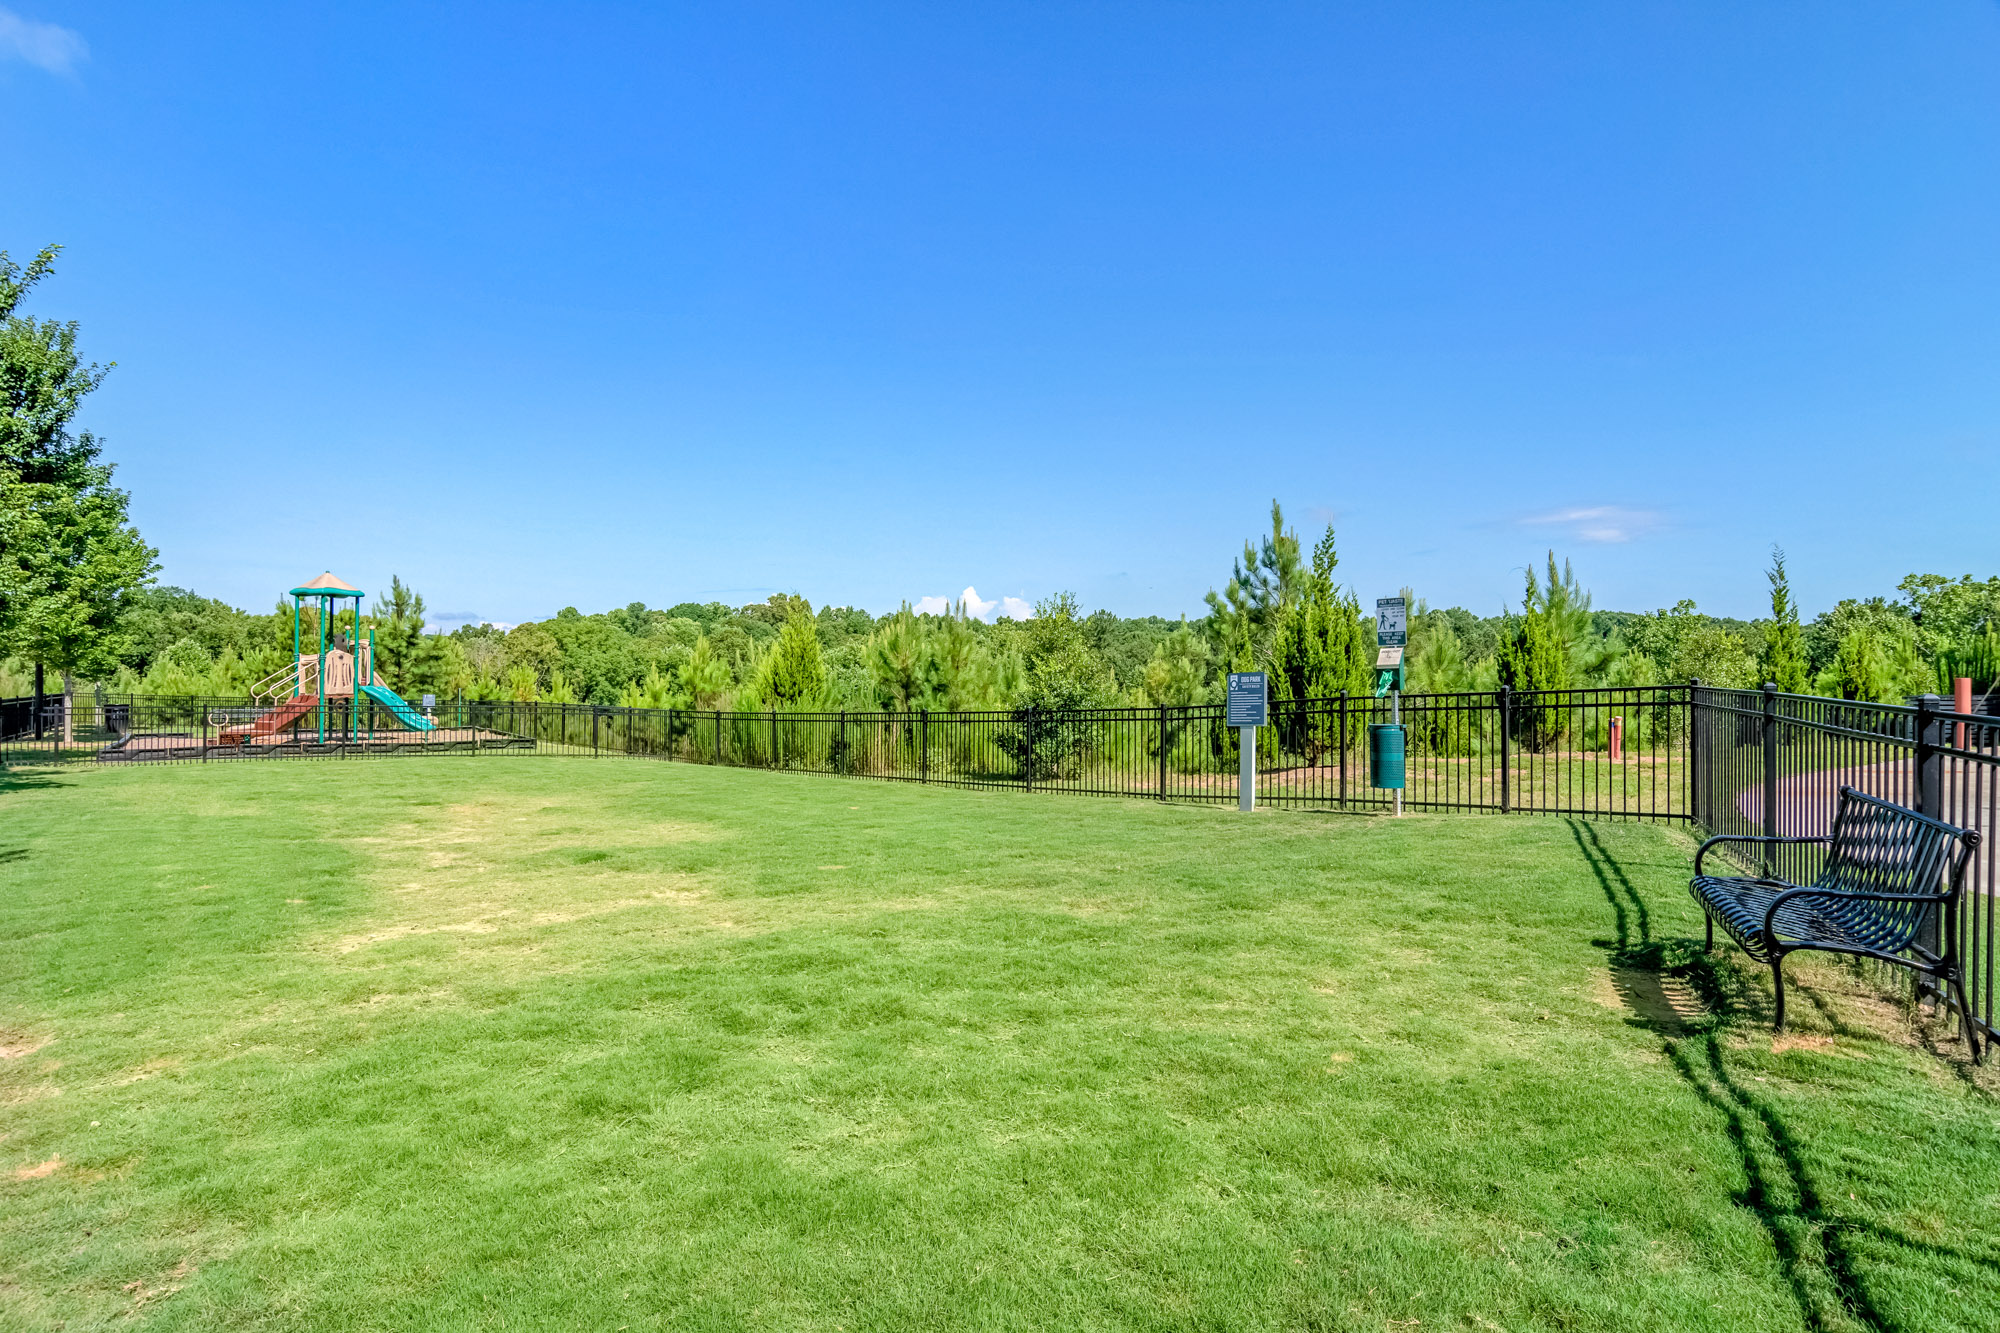 A large fenced in green lawn with a park bench and dog waste system on the right side of the photo.